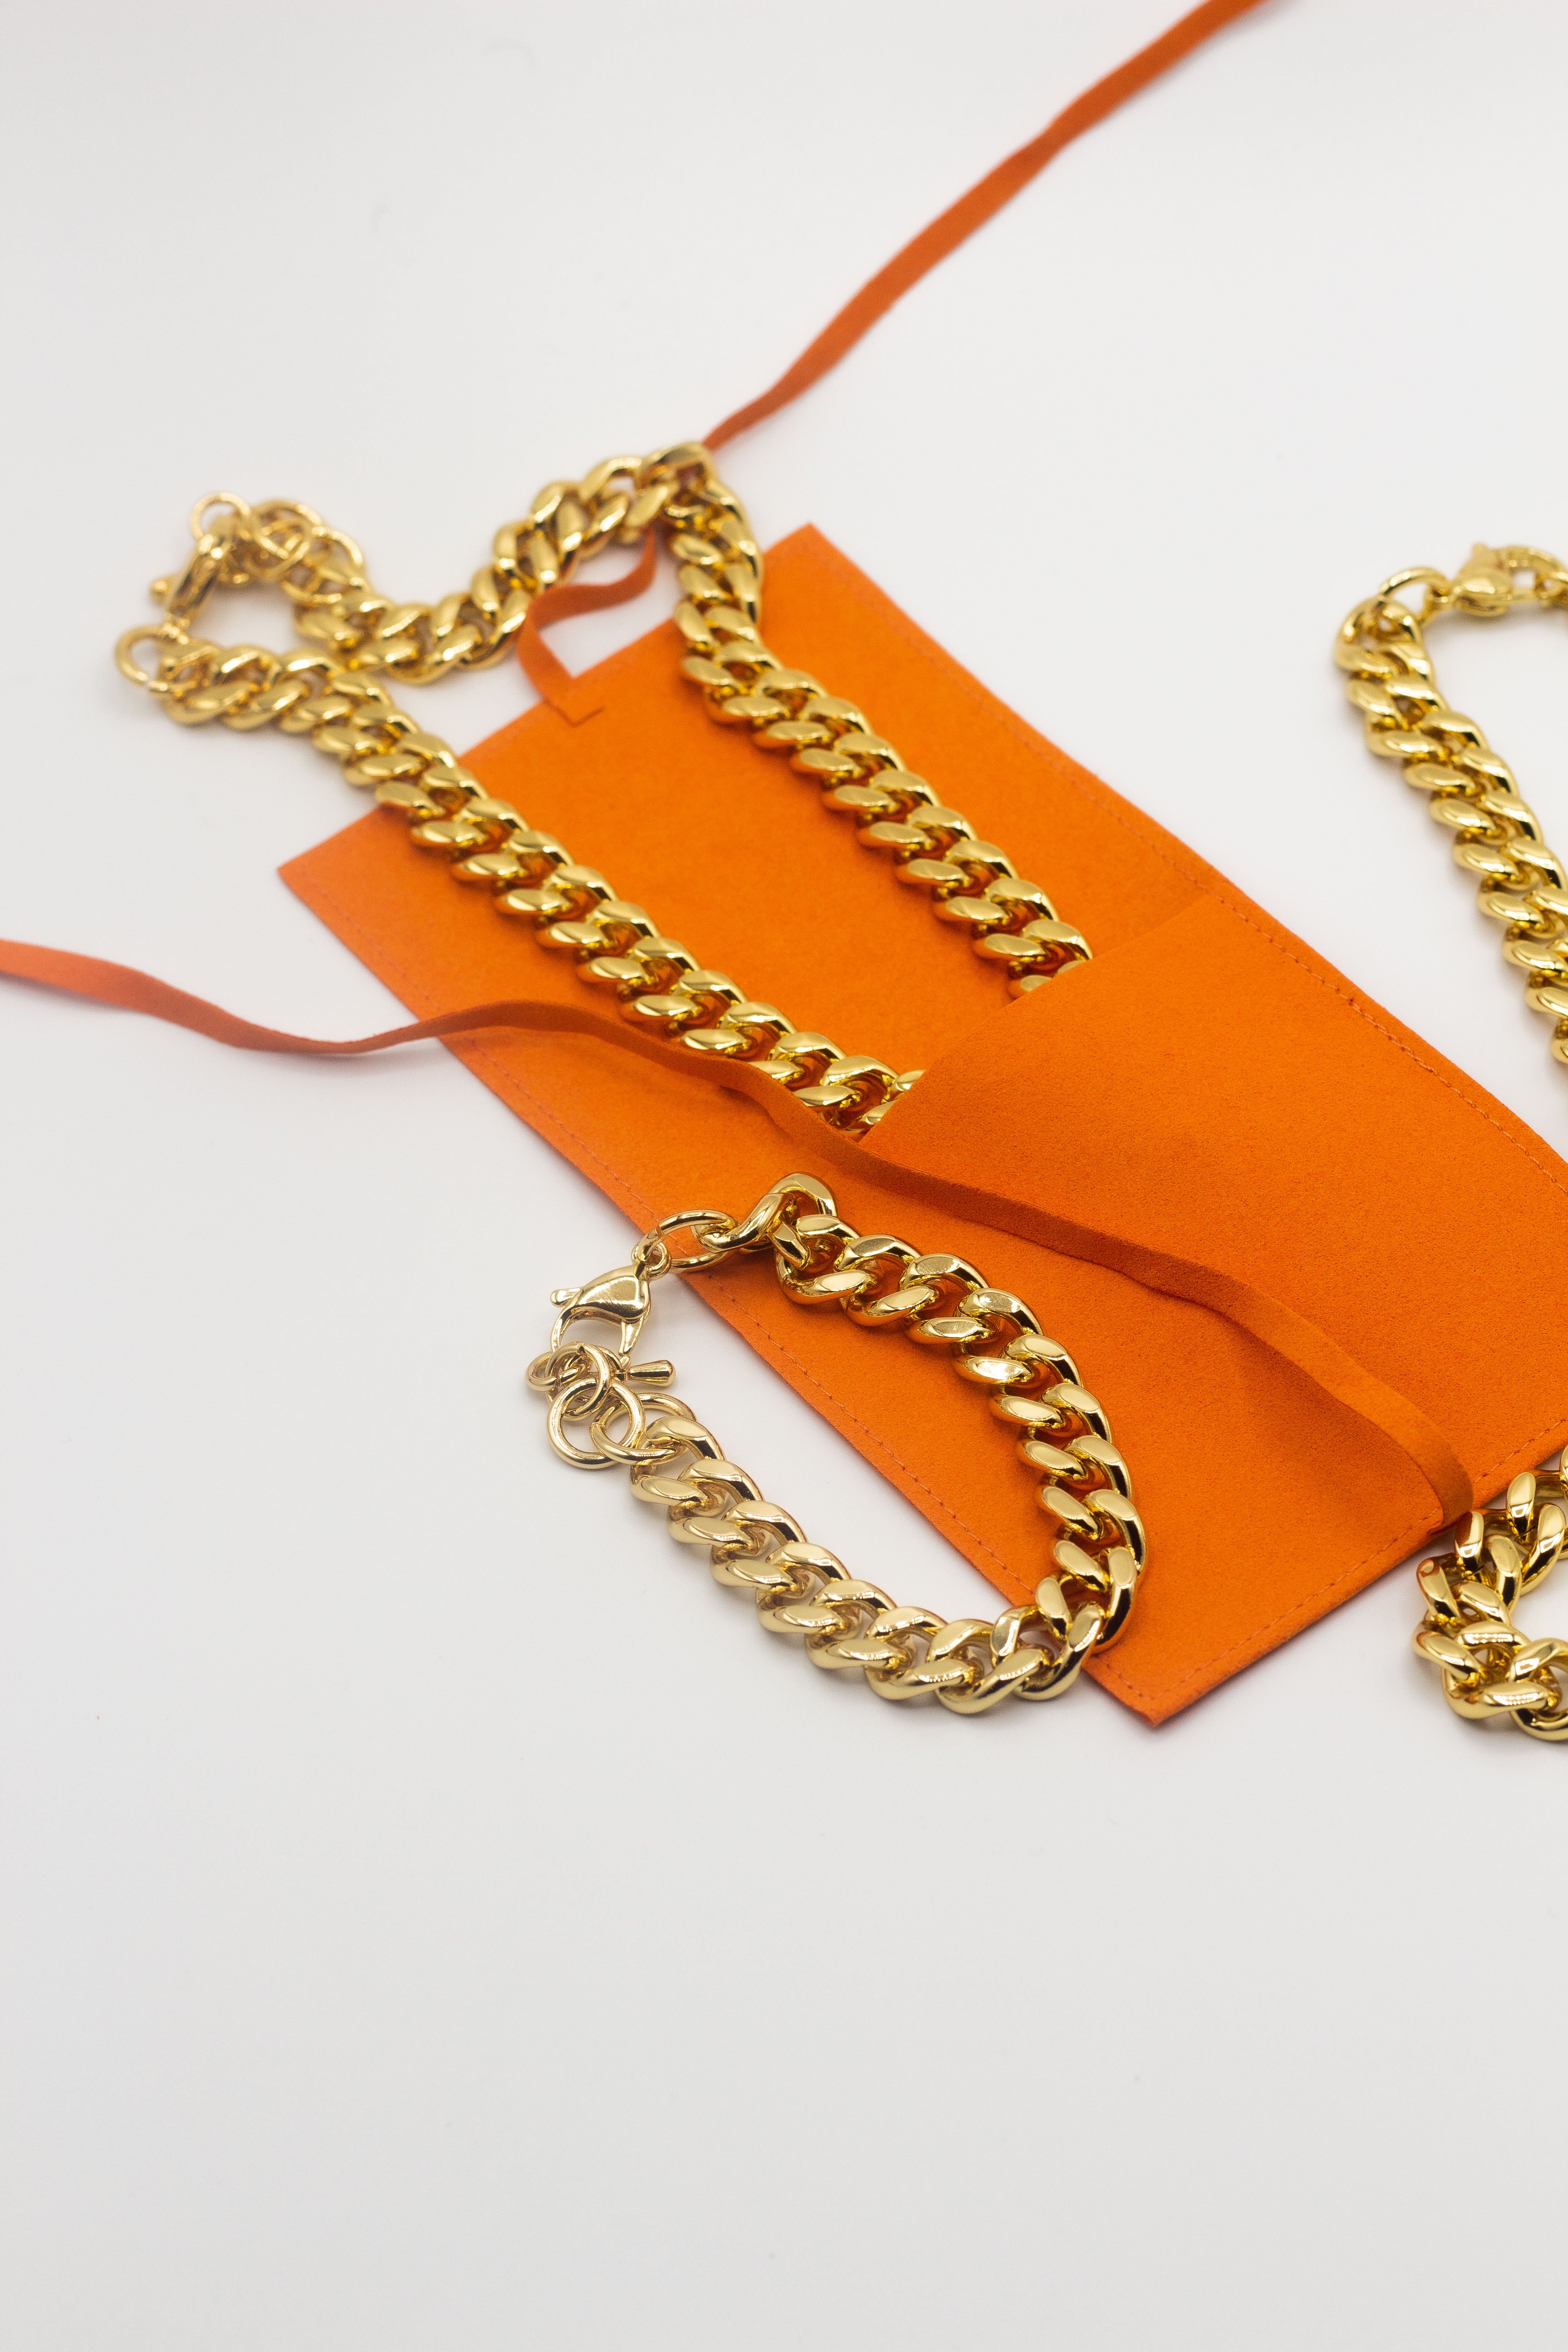 18k gold chain necklace resting inside an orange microfiber leather pouch. On the left is a gold chain bracelet and on the right is another gold chain necklace.  Microfiber Jewelry Pouch by E's Element